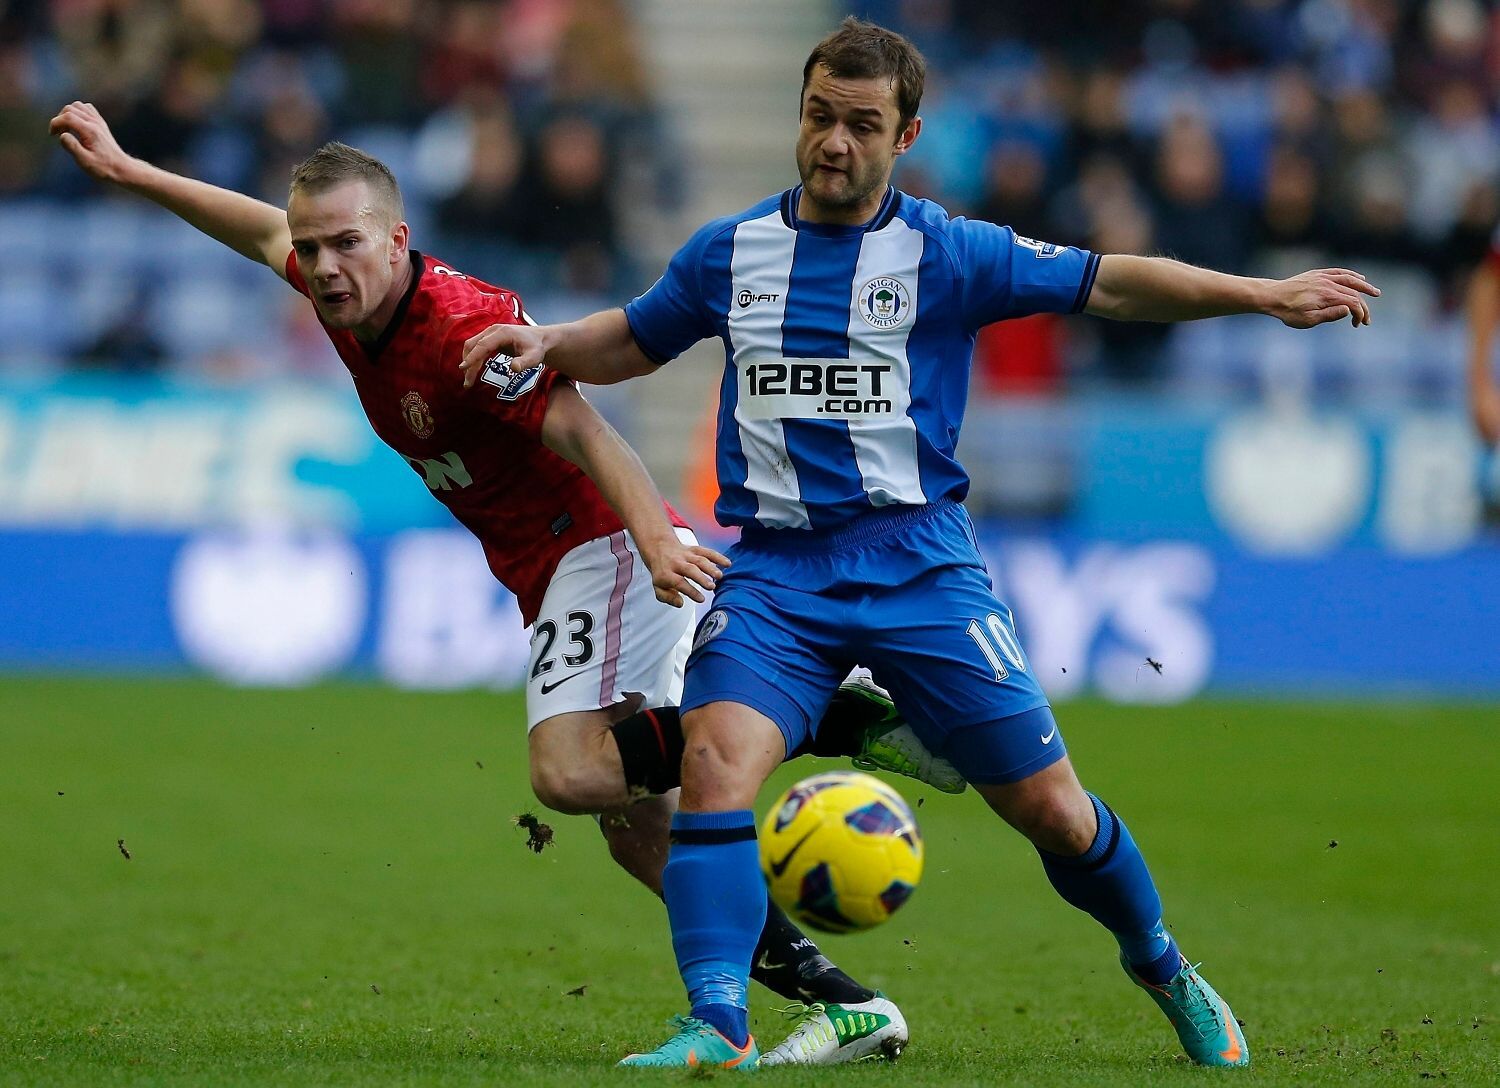 Premier League, Manchester United - Wigan: Tom Cleverley - Shaun Maloney